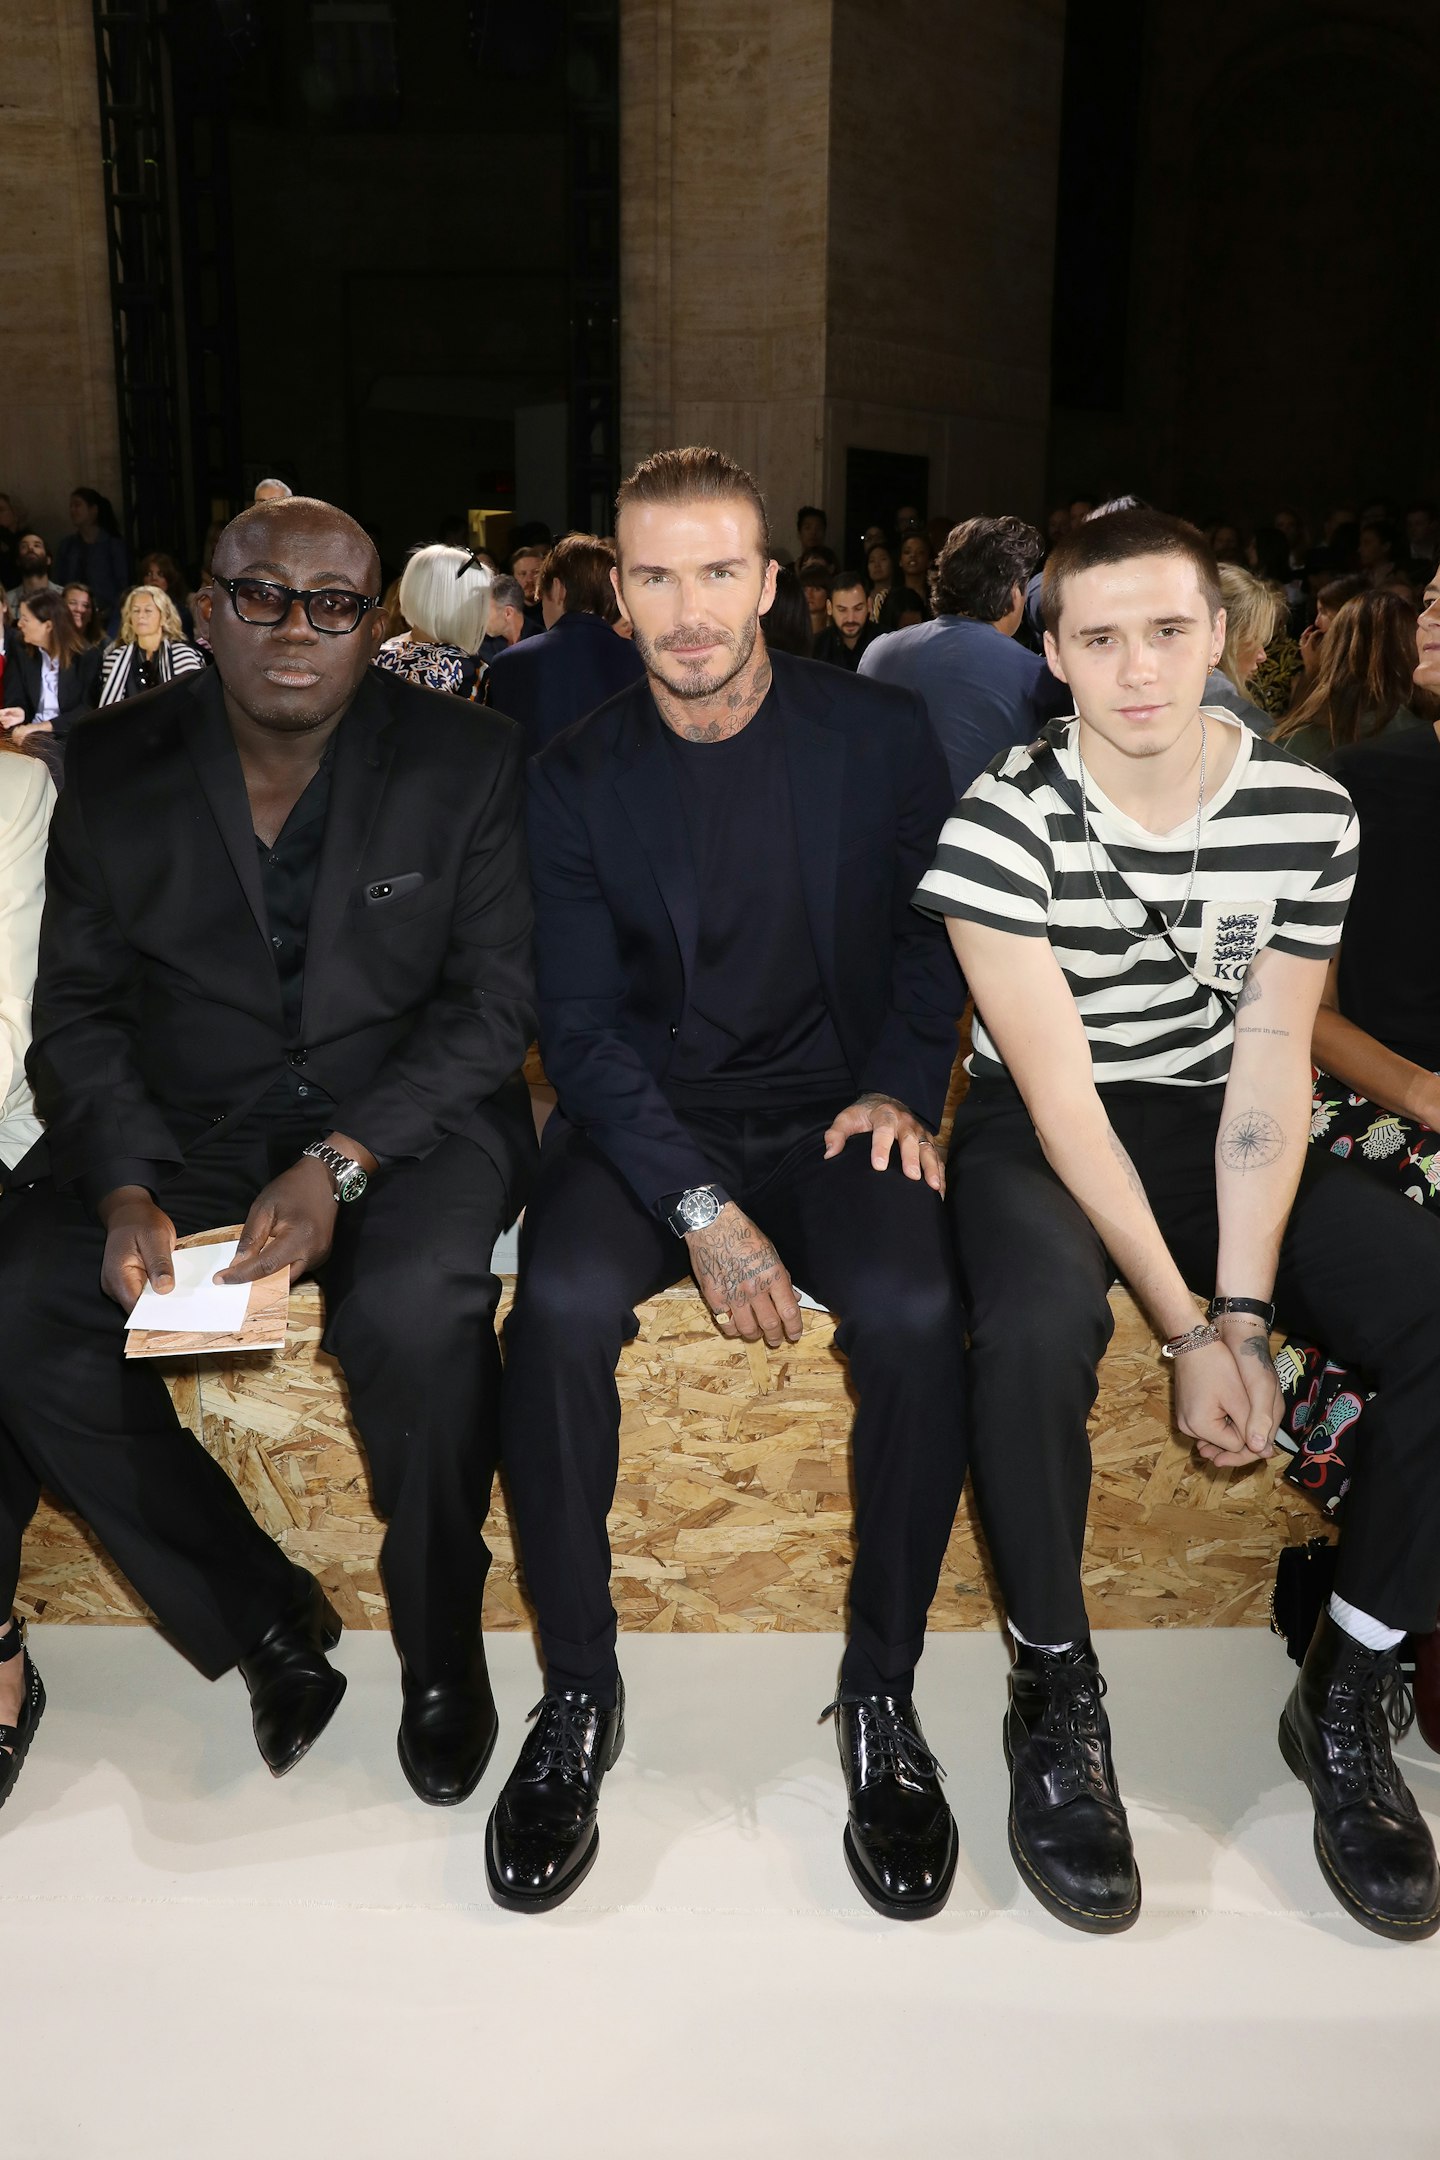 Two Beckhams plus the new editor of British Vogue equals the perfect Victoria Beckham front row